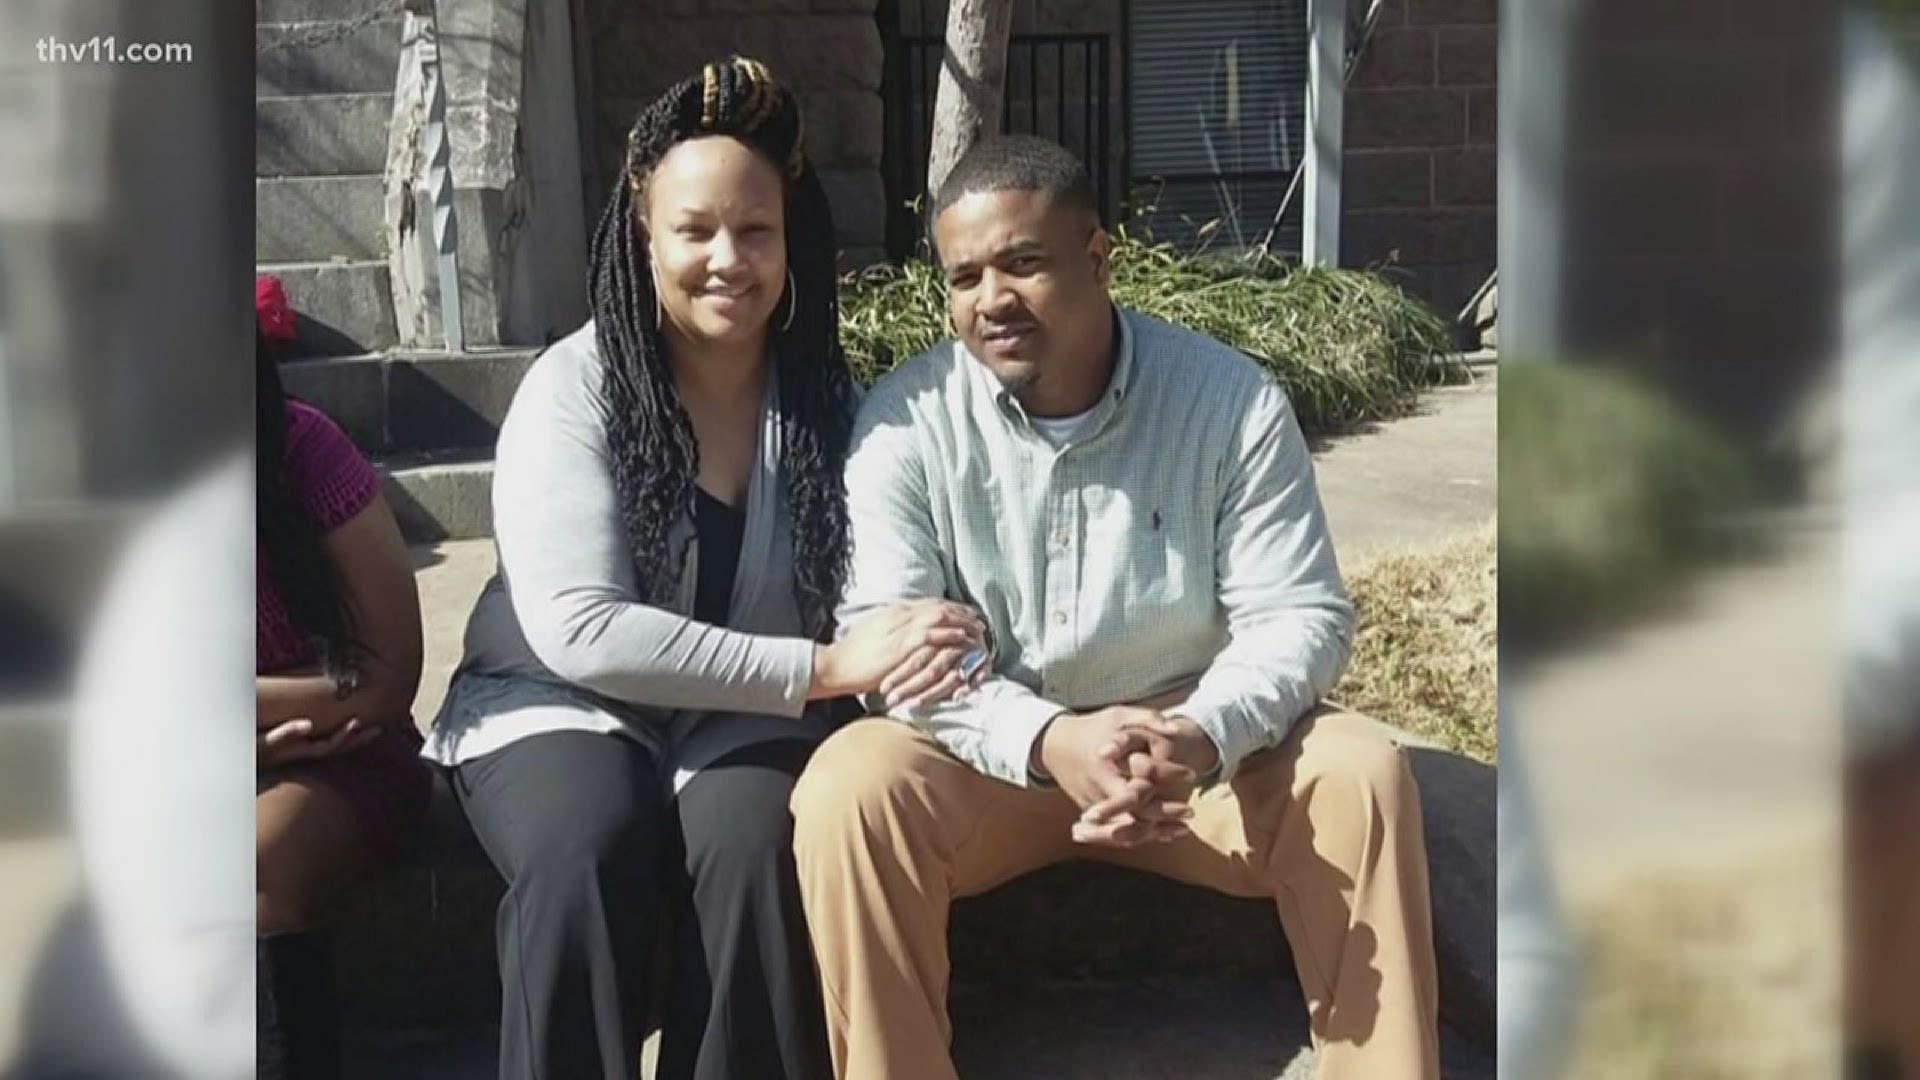 Forty-four inmates at a state prison near Pine Bluff tested positive for COVID-19 over the weekend and a mother is extremely worried her son is one of those positive